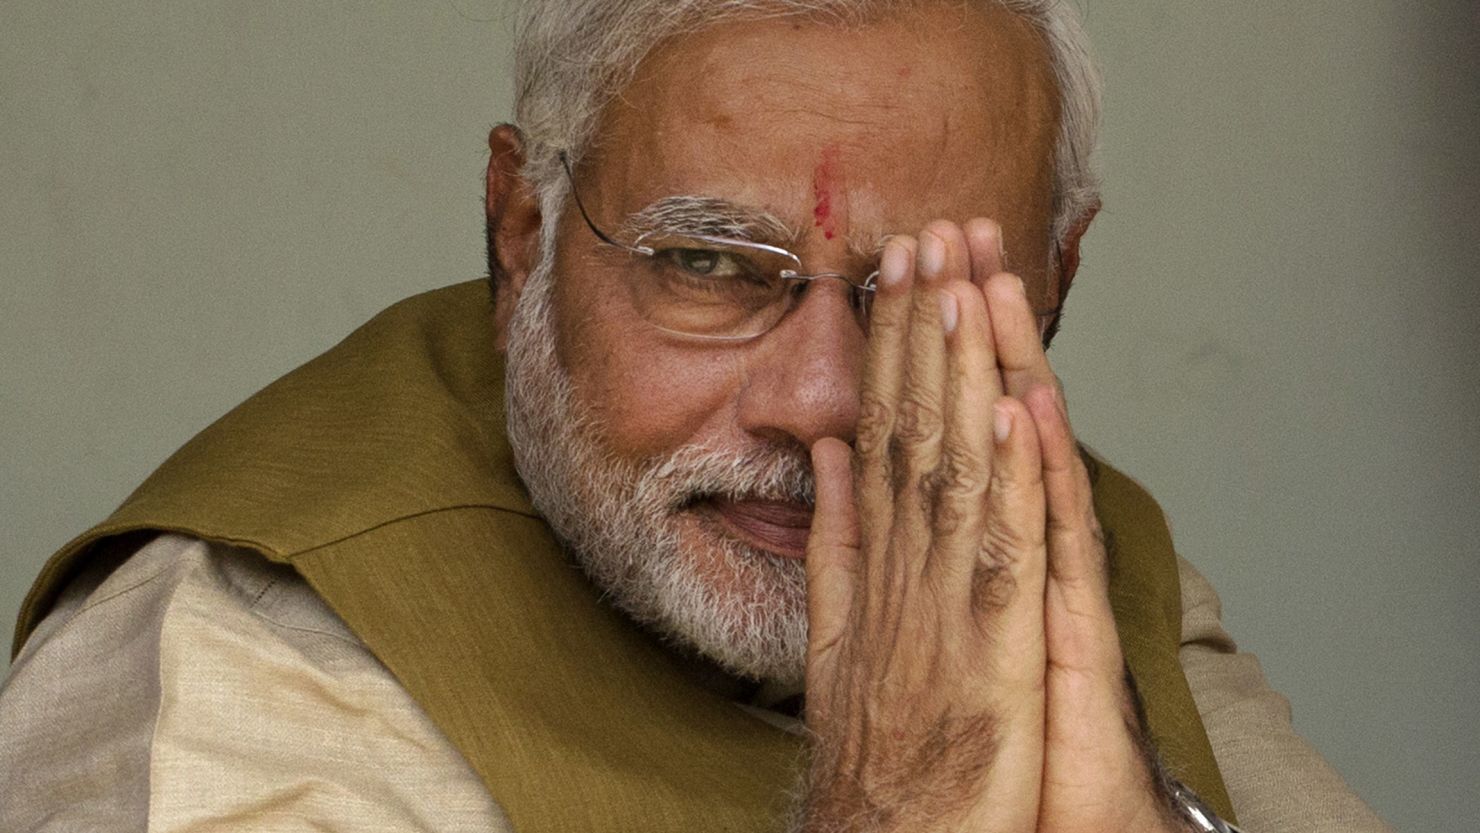 Narendra Modi gestures to supporters after seeking his mother's blessing in Ahmedabad, India on May 16, 2014.